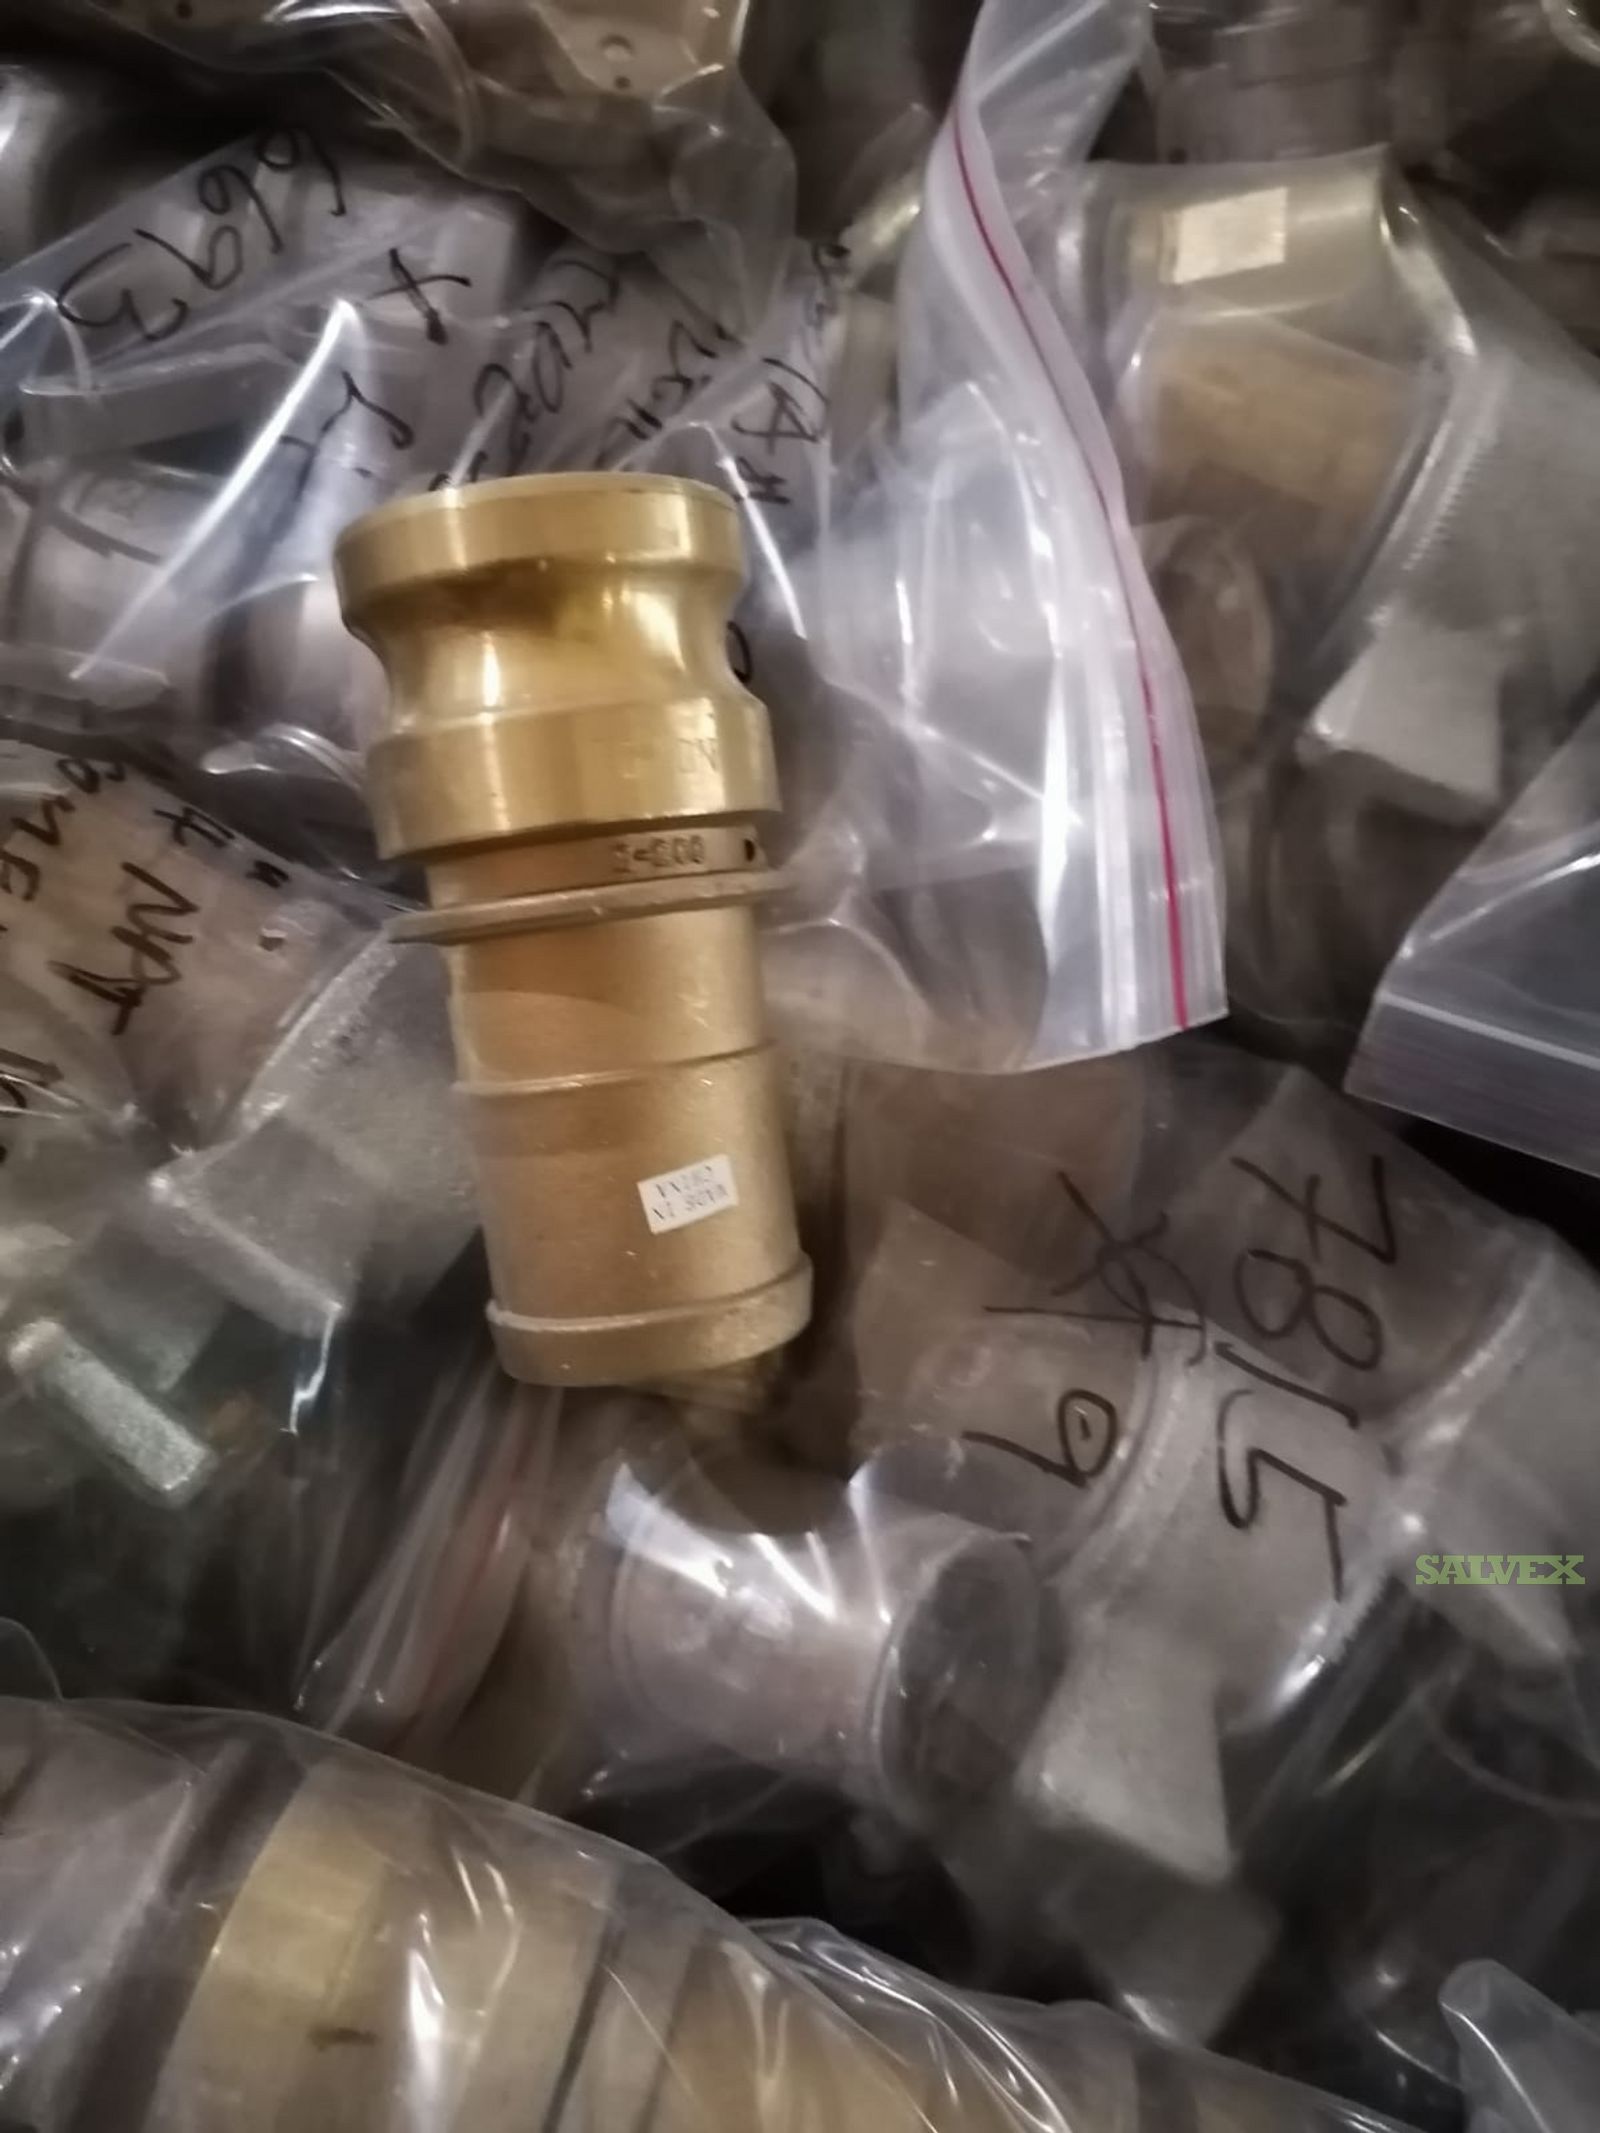 Alfa Gomma Hydraulic Fittings: Ball Valves, Check Valves, Branch Trees, Couplings, Flanges Etc. Size 1/8 Up to 2  (39,567 Units)